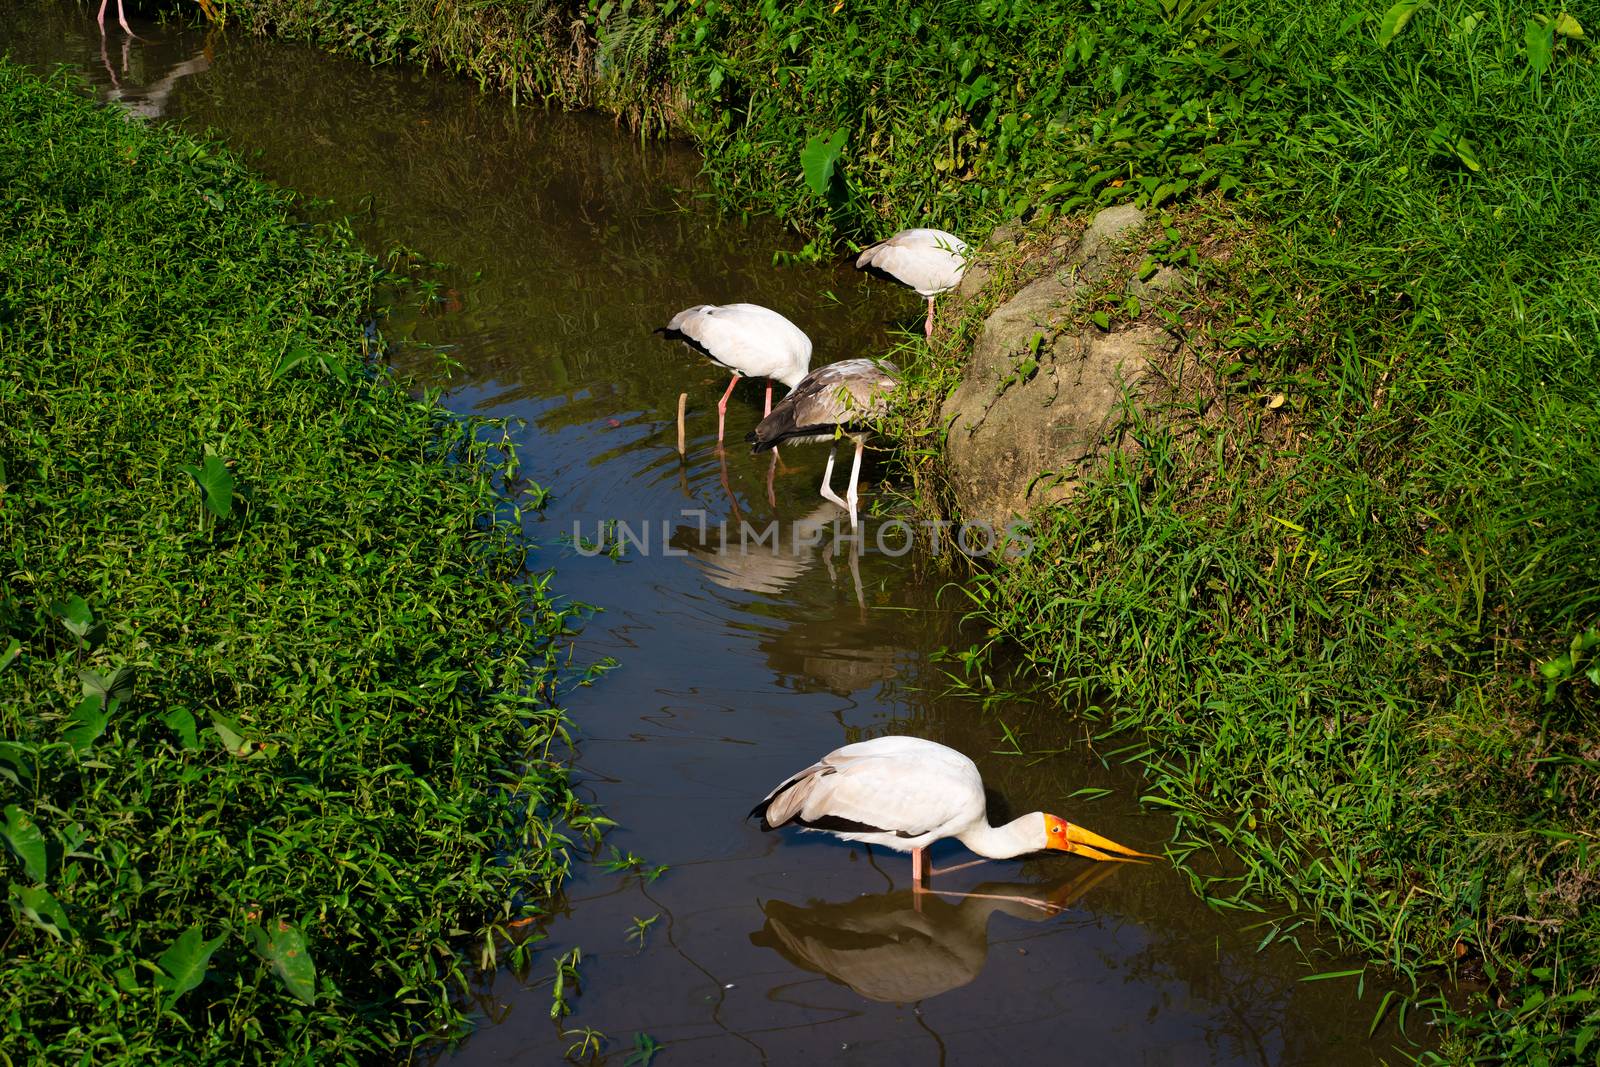 A flock of milk stork is hunting in a pond. Looking for fish.